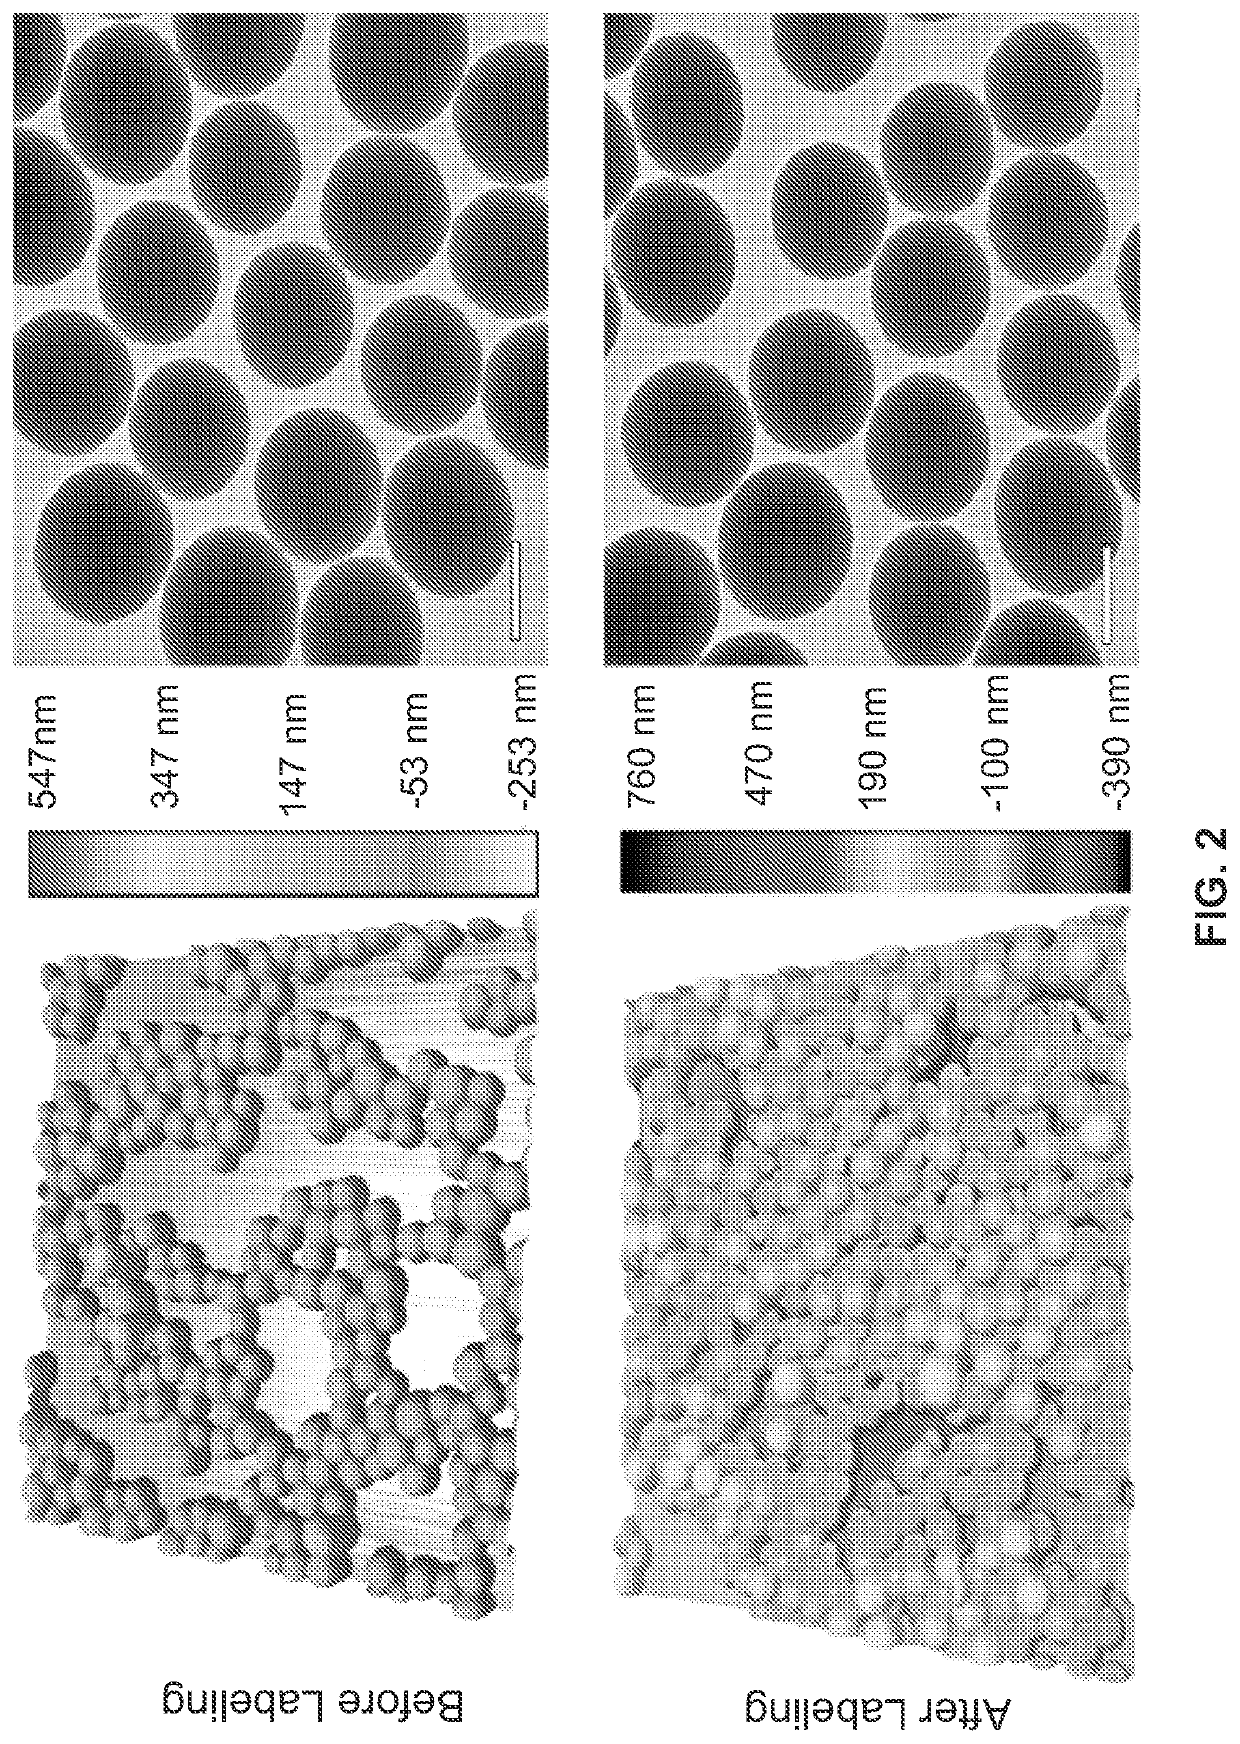 Metal(loid) chalcogen nanoparticles as universal binders for medical isotopes